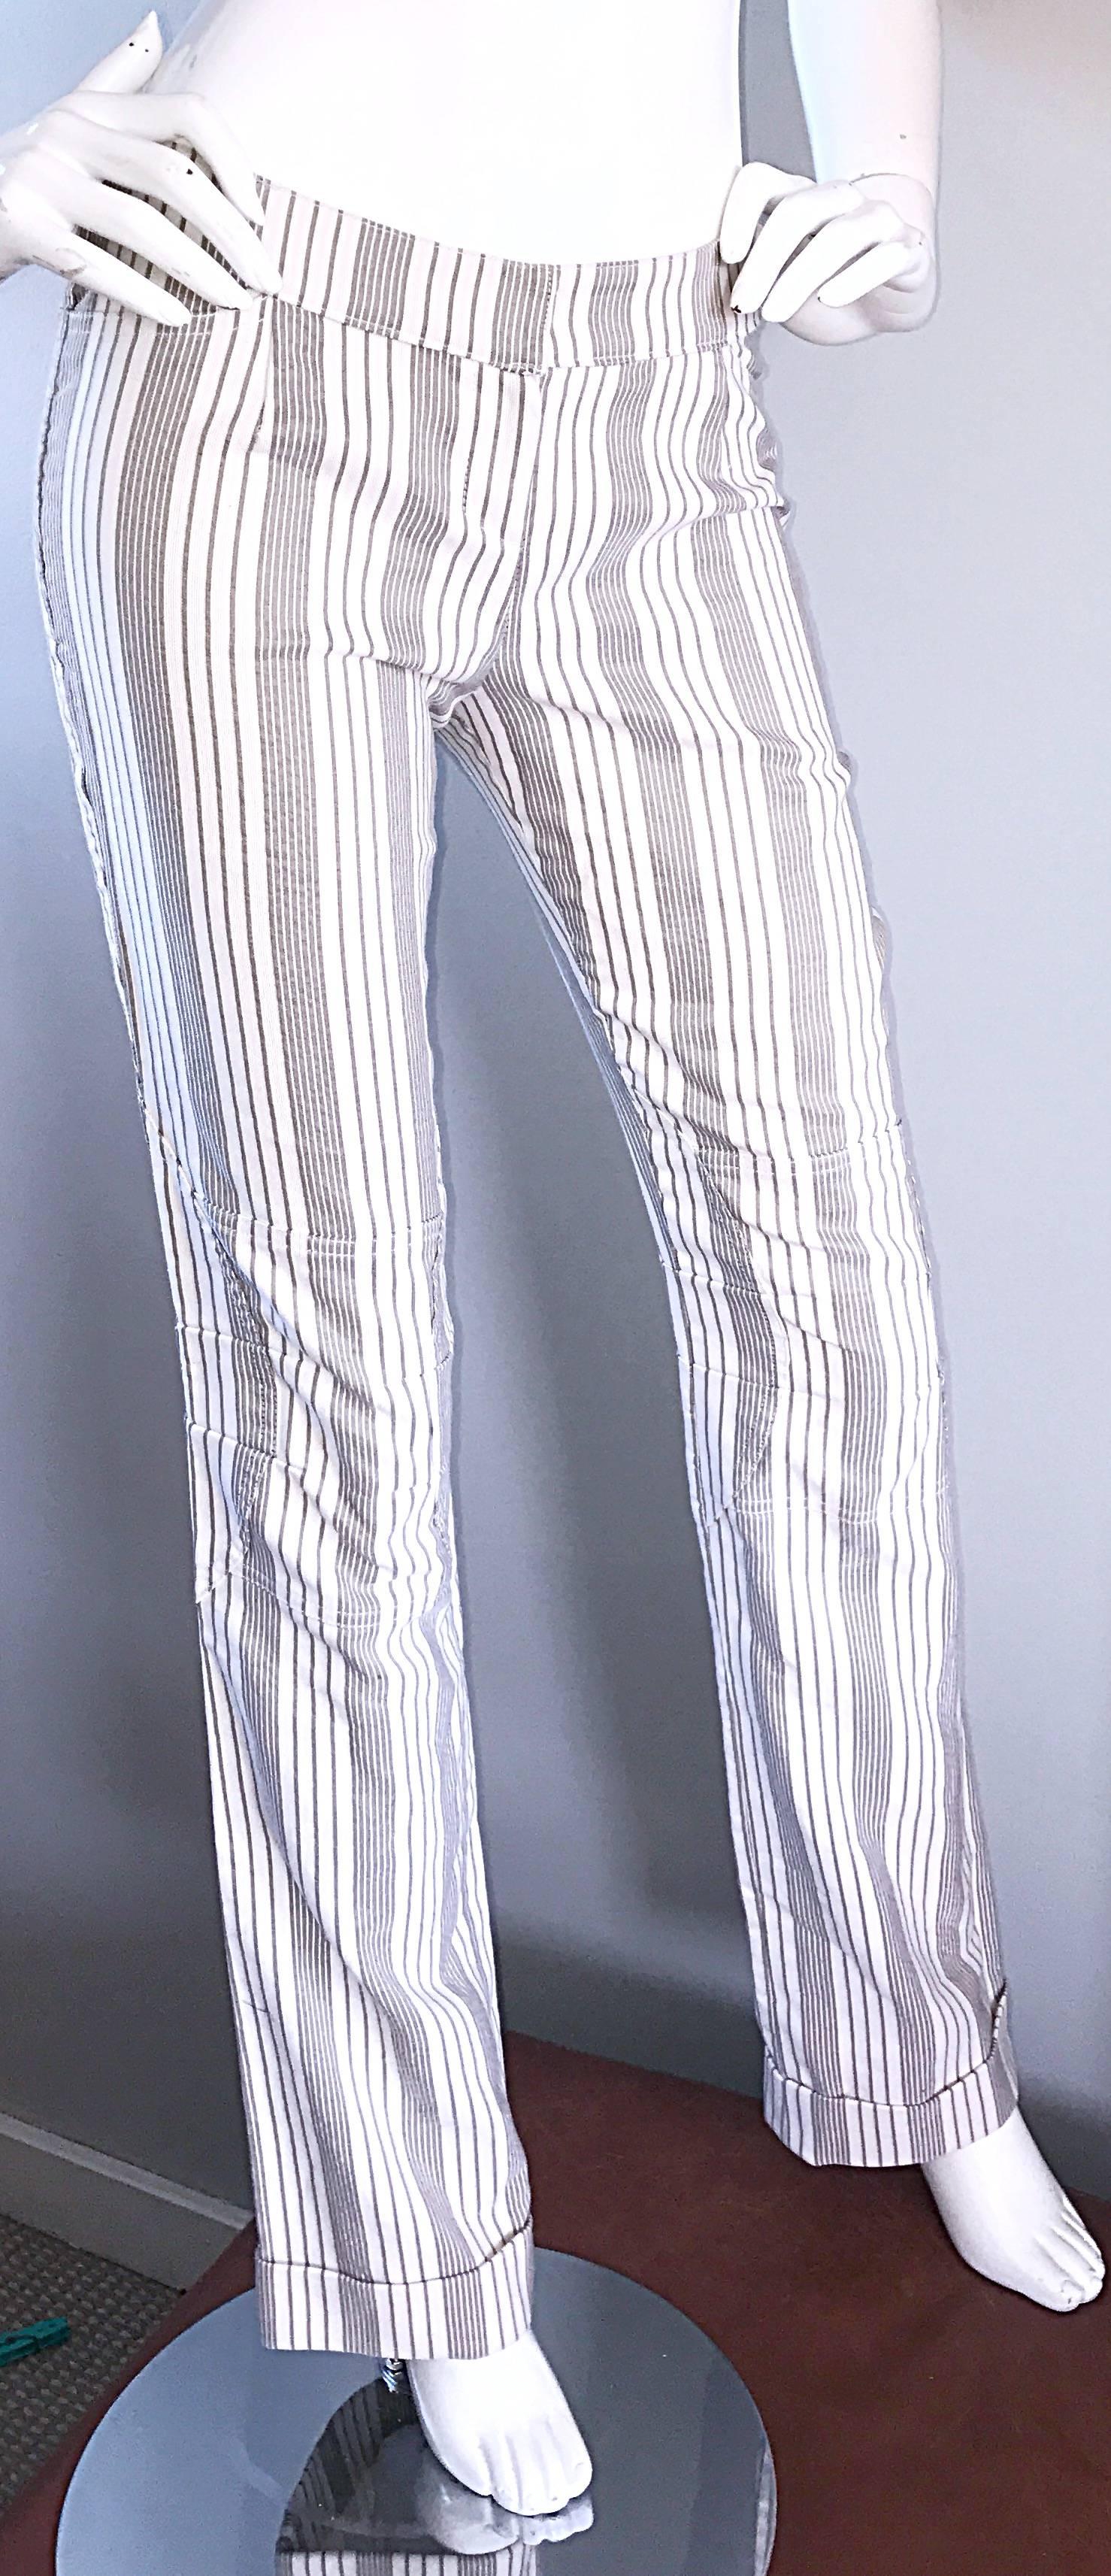 Christian Dior John Galliano Y2K Gray and White Pinstripe Flared Leg Trousers In Excellent Condition For Sale In San Diego, CA